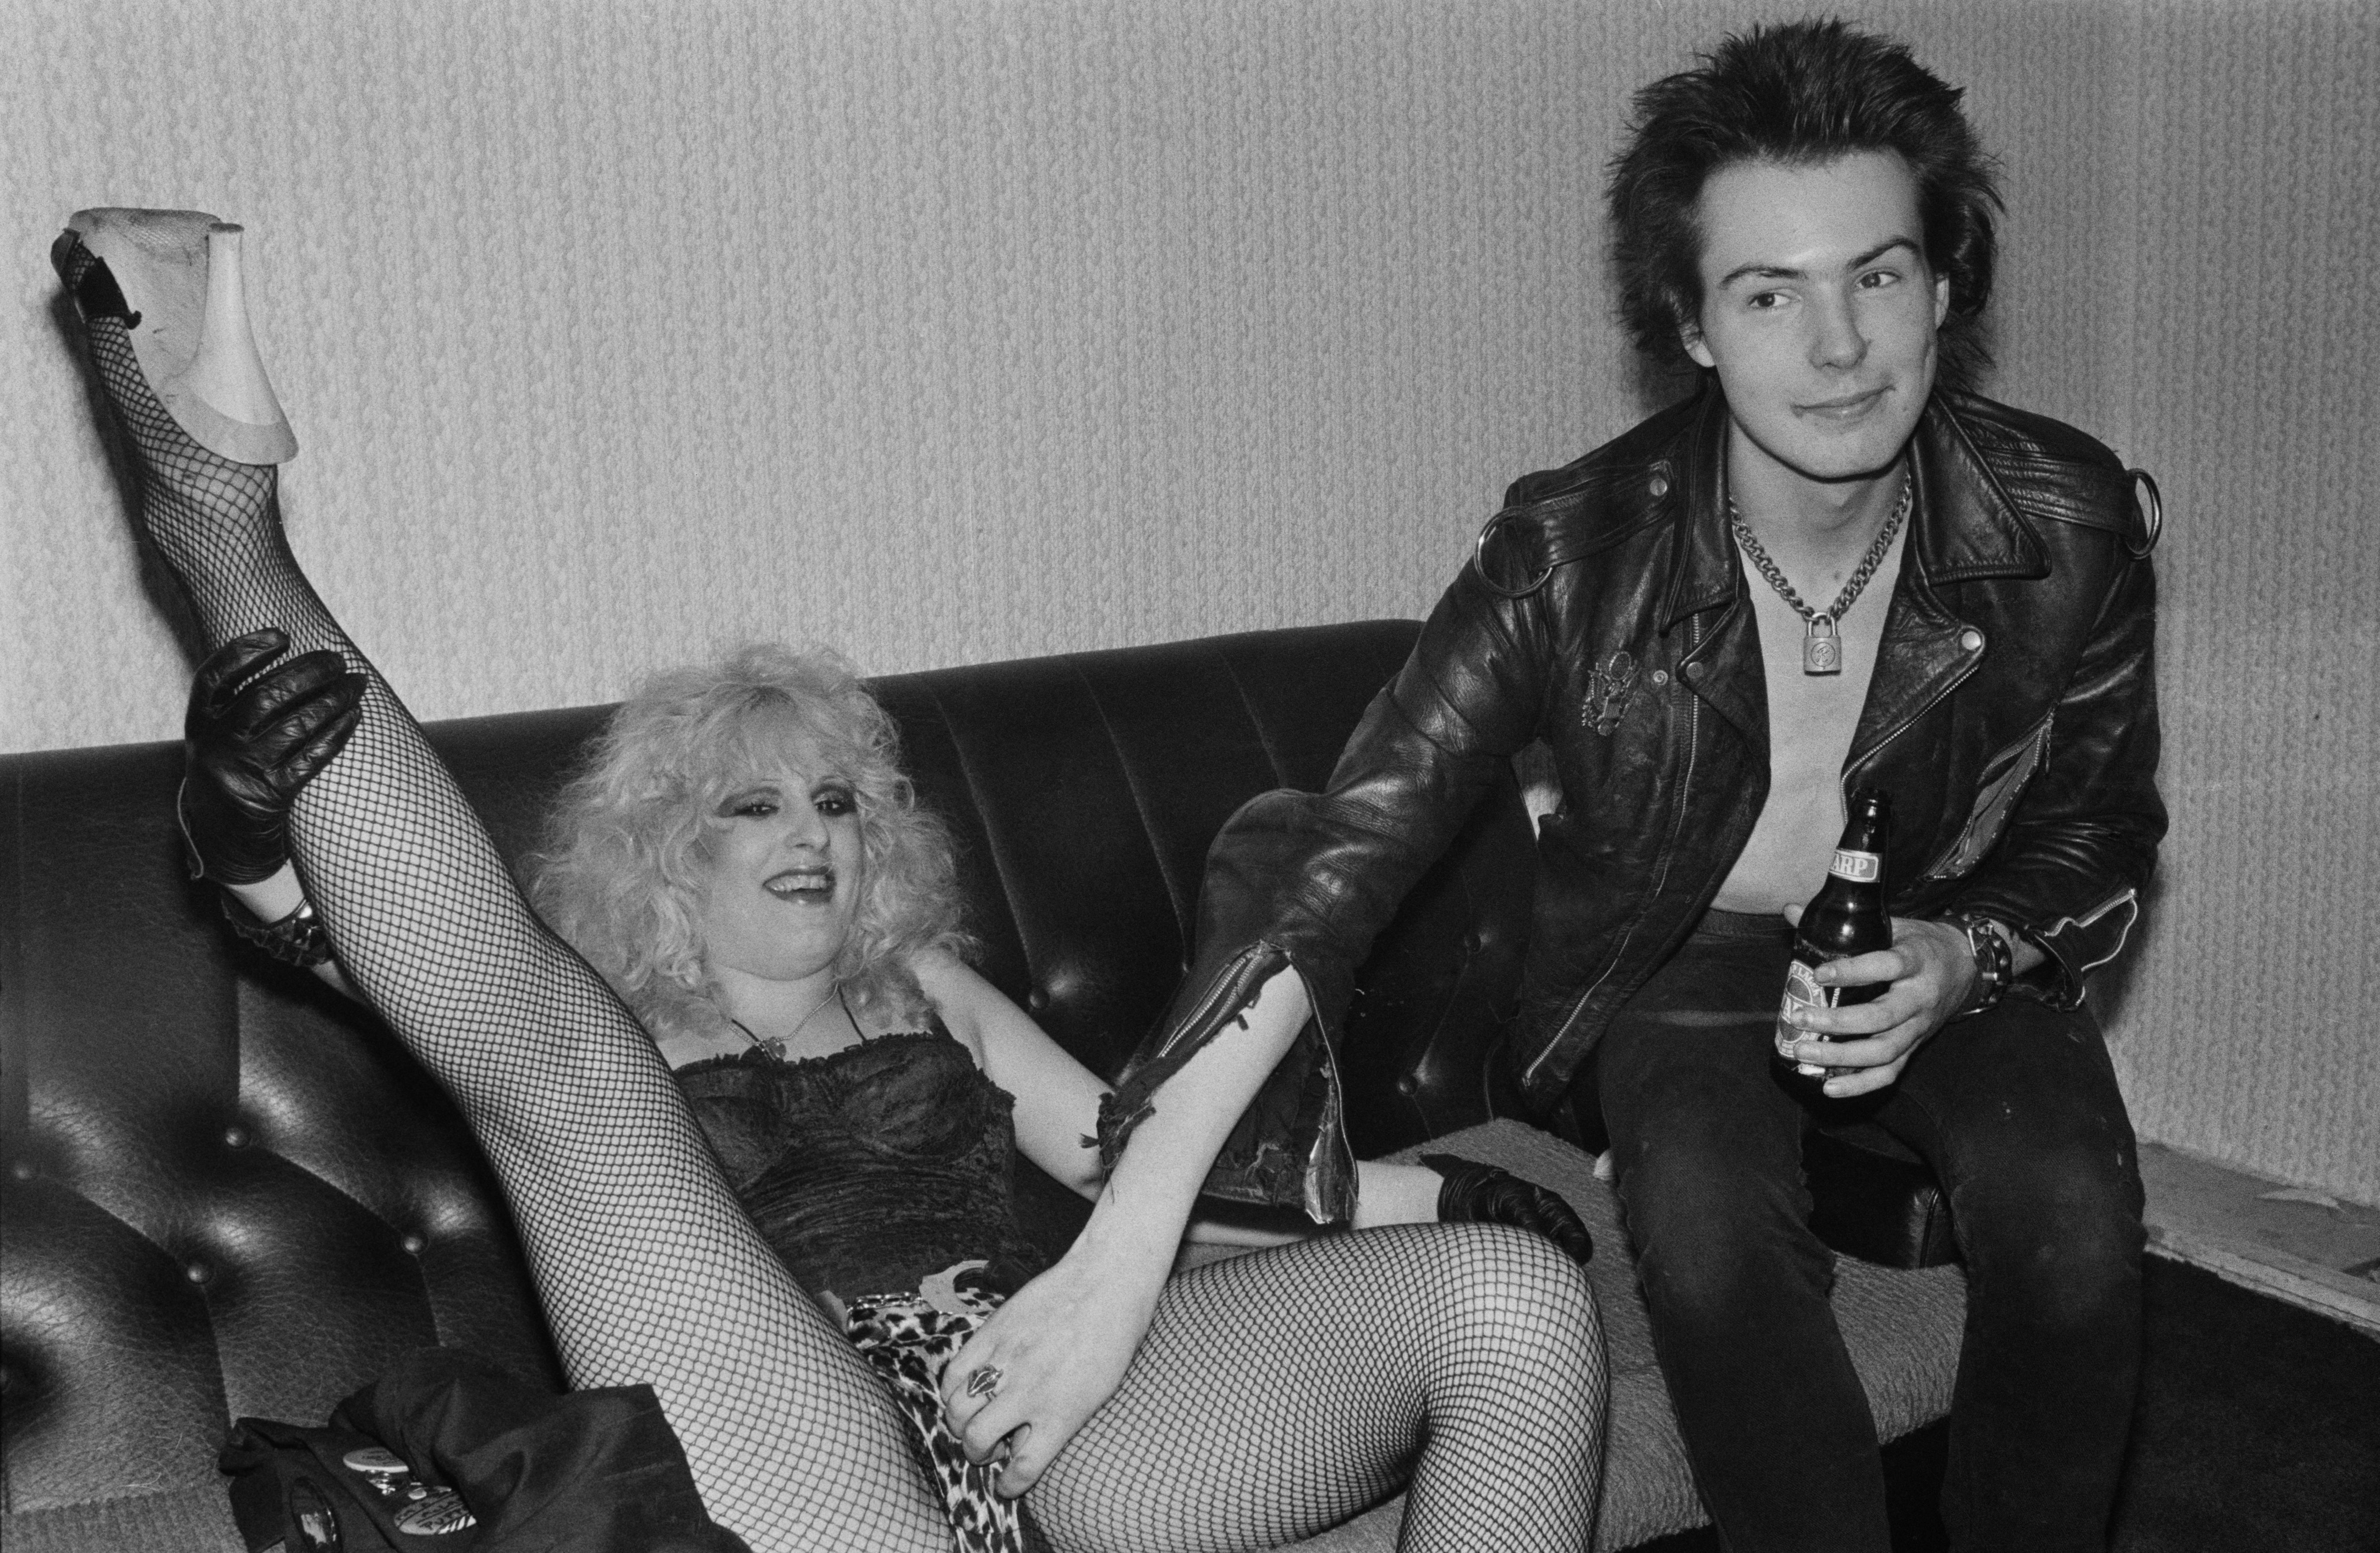 Sid Vicious with girlfriend Nancy Spungen in the backstage of the Electric Ballroom in Camden, 15 August 1978